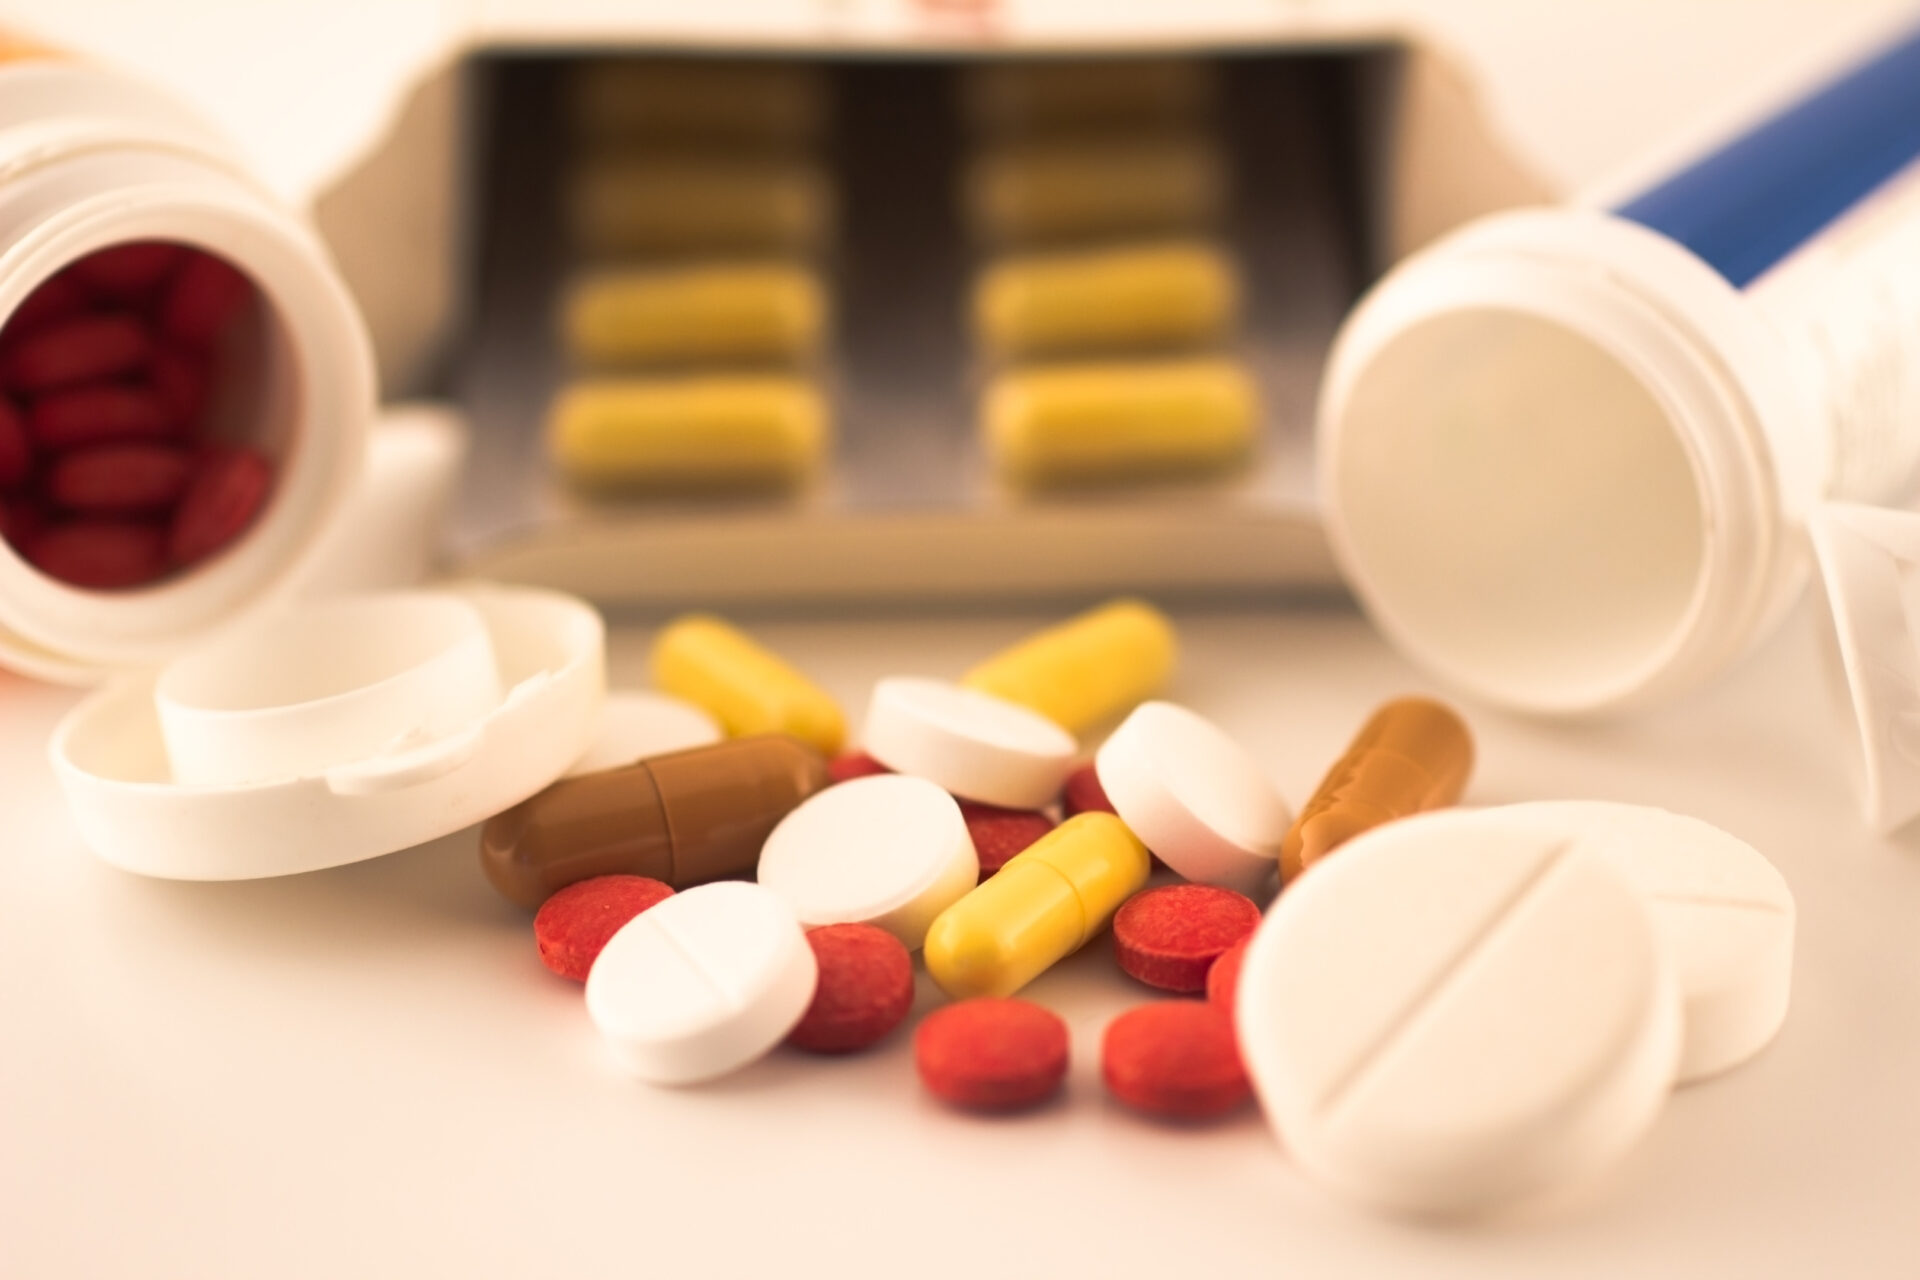 Prescription errors - several prescription bottles and pills on a table - The Pagan Law Firm